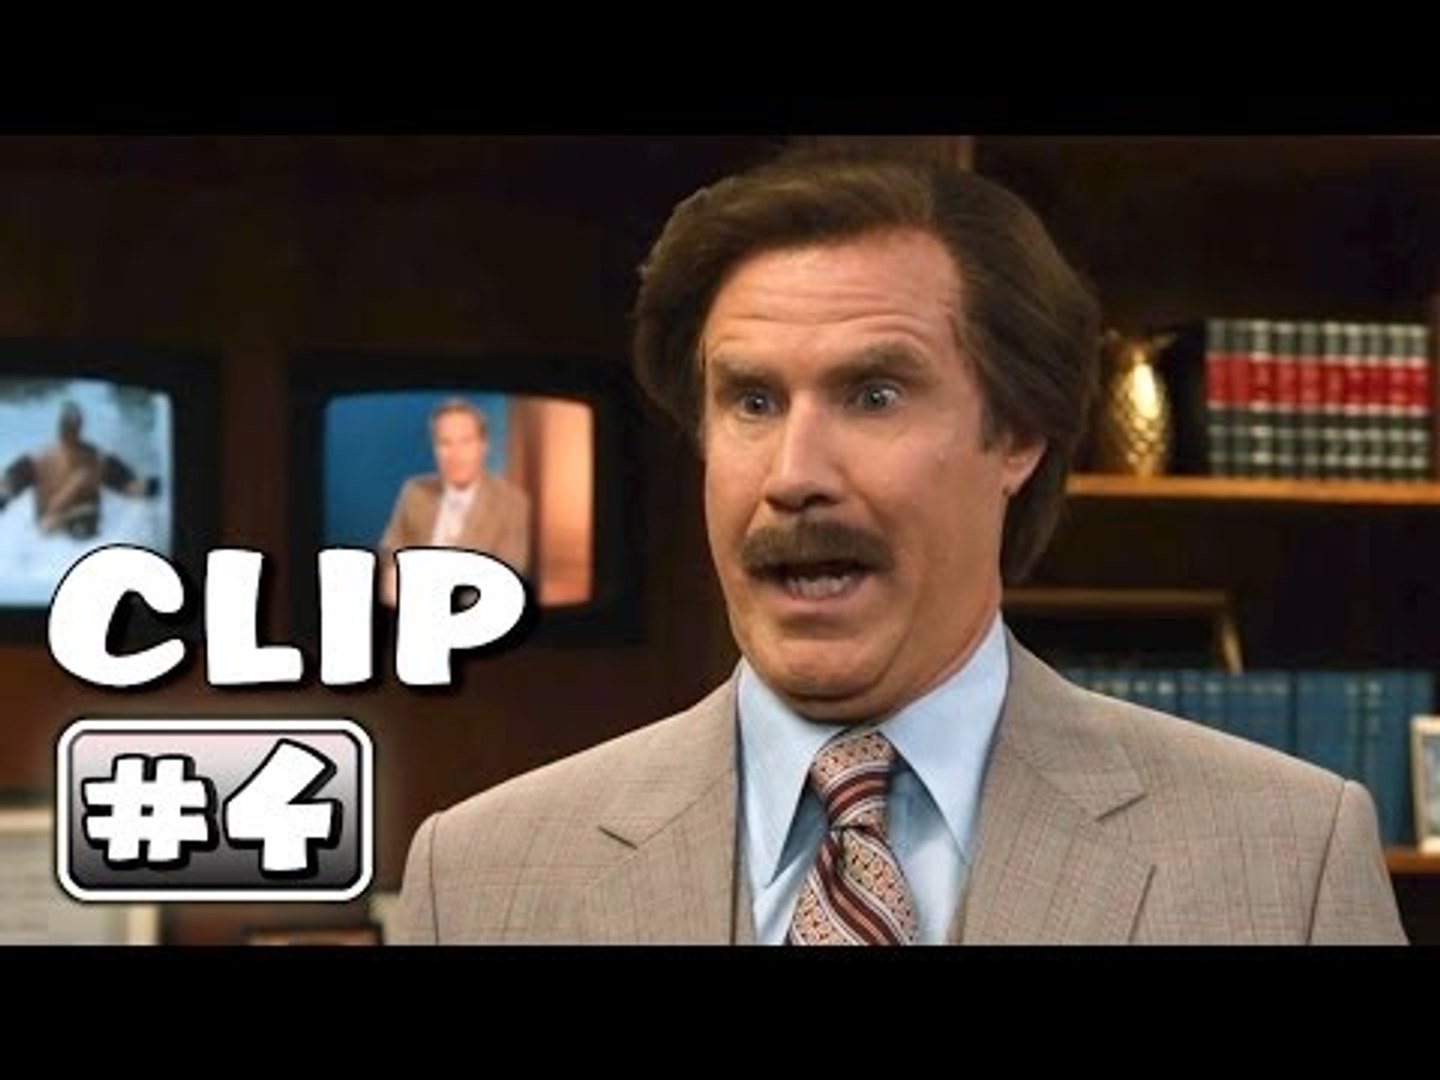 Black People Freak Me Out" ANCHORMAN 2 Movie Clip # 4 - video Dailymotion